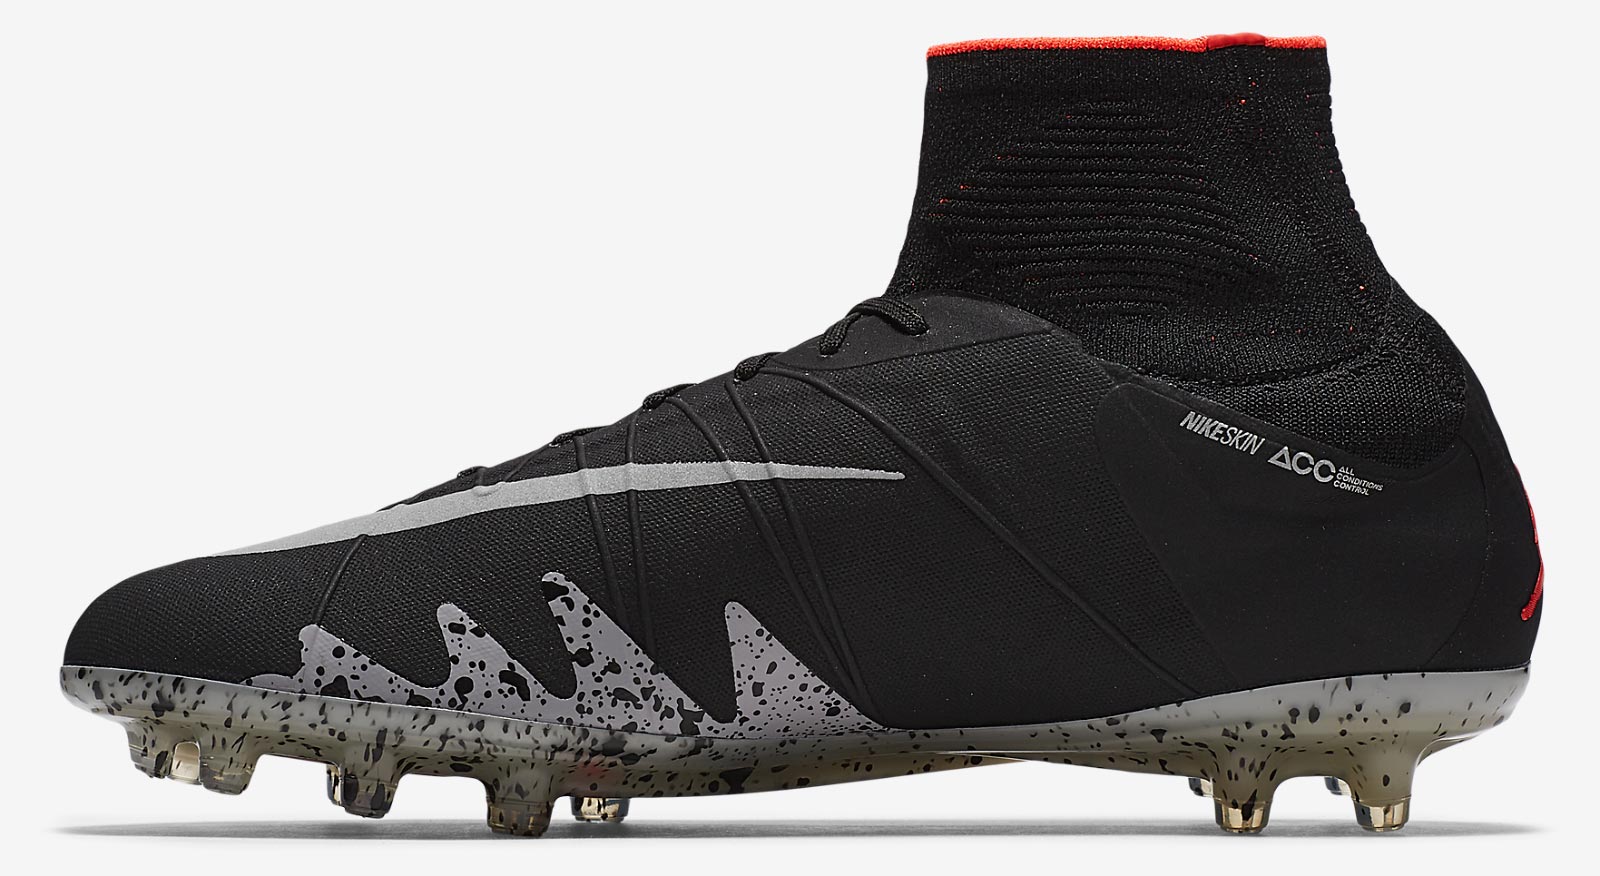 x Air 2016 Football Boots Released - Headlines